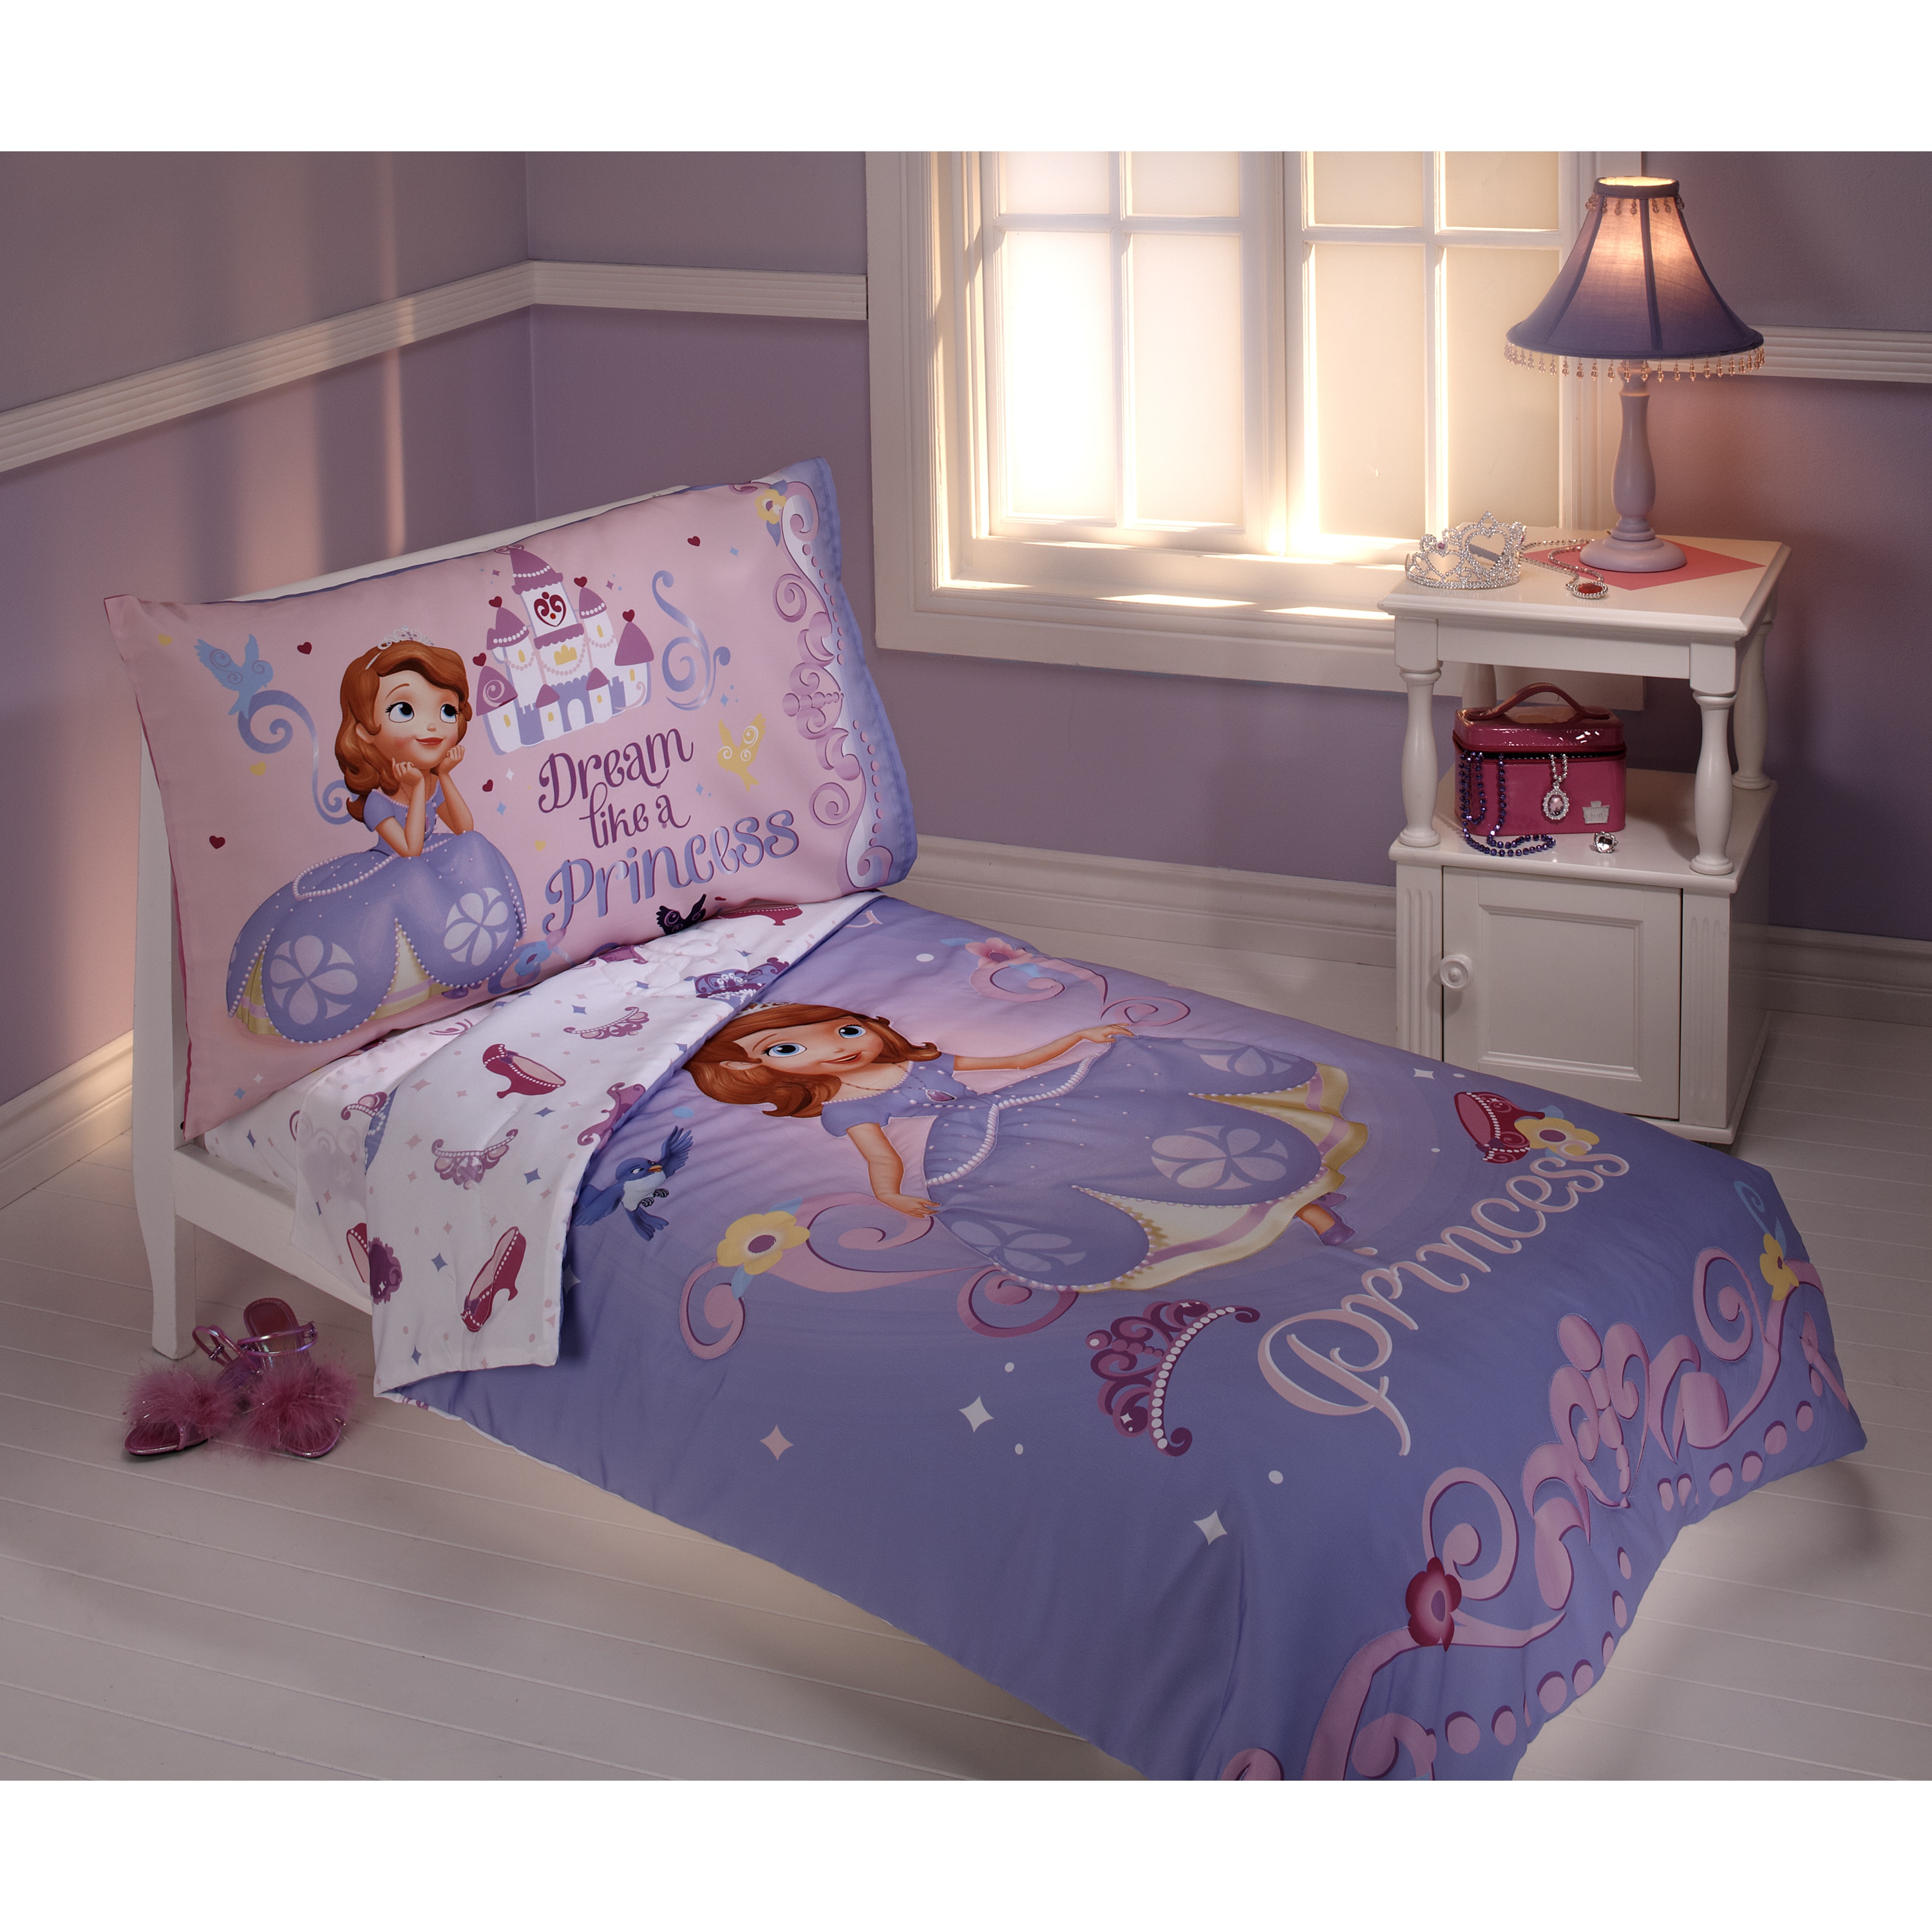 Shop Sofia The First 4 Piece Toddler Bedding Set Overstock